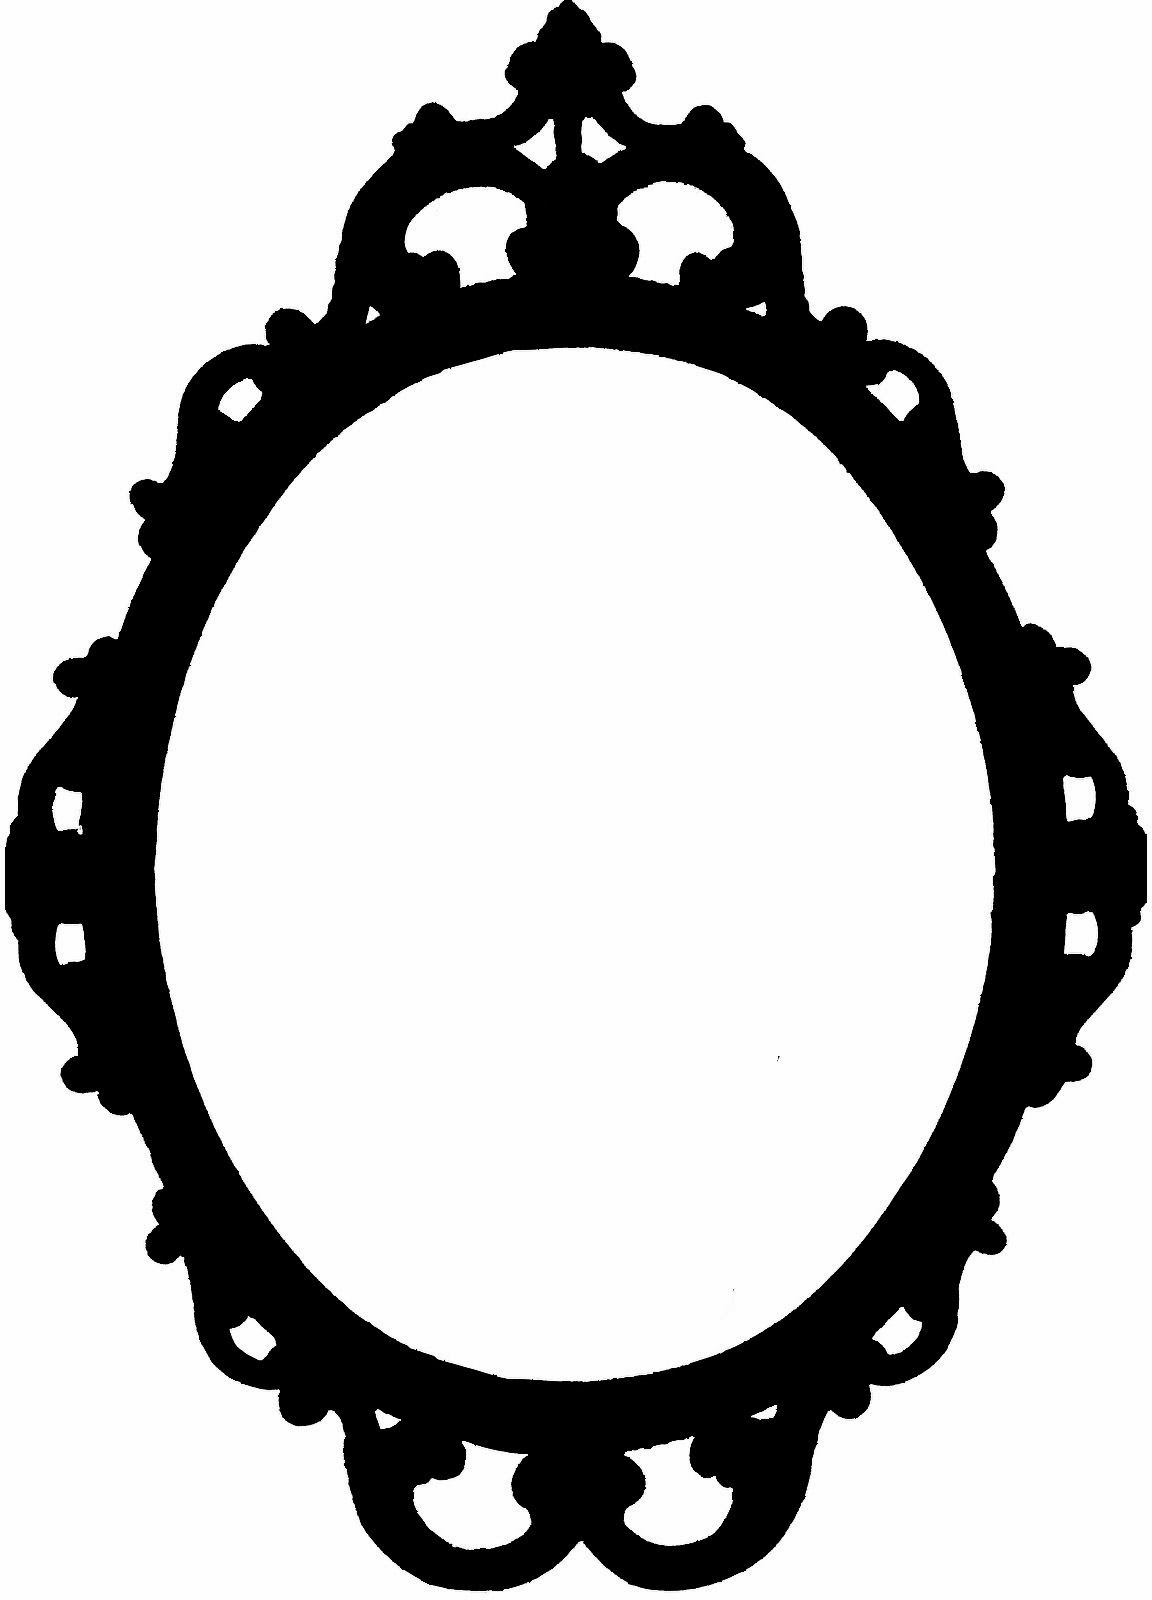 The Free SVG Blog: Another beautiful frame - Free .SVG Download